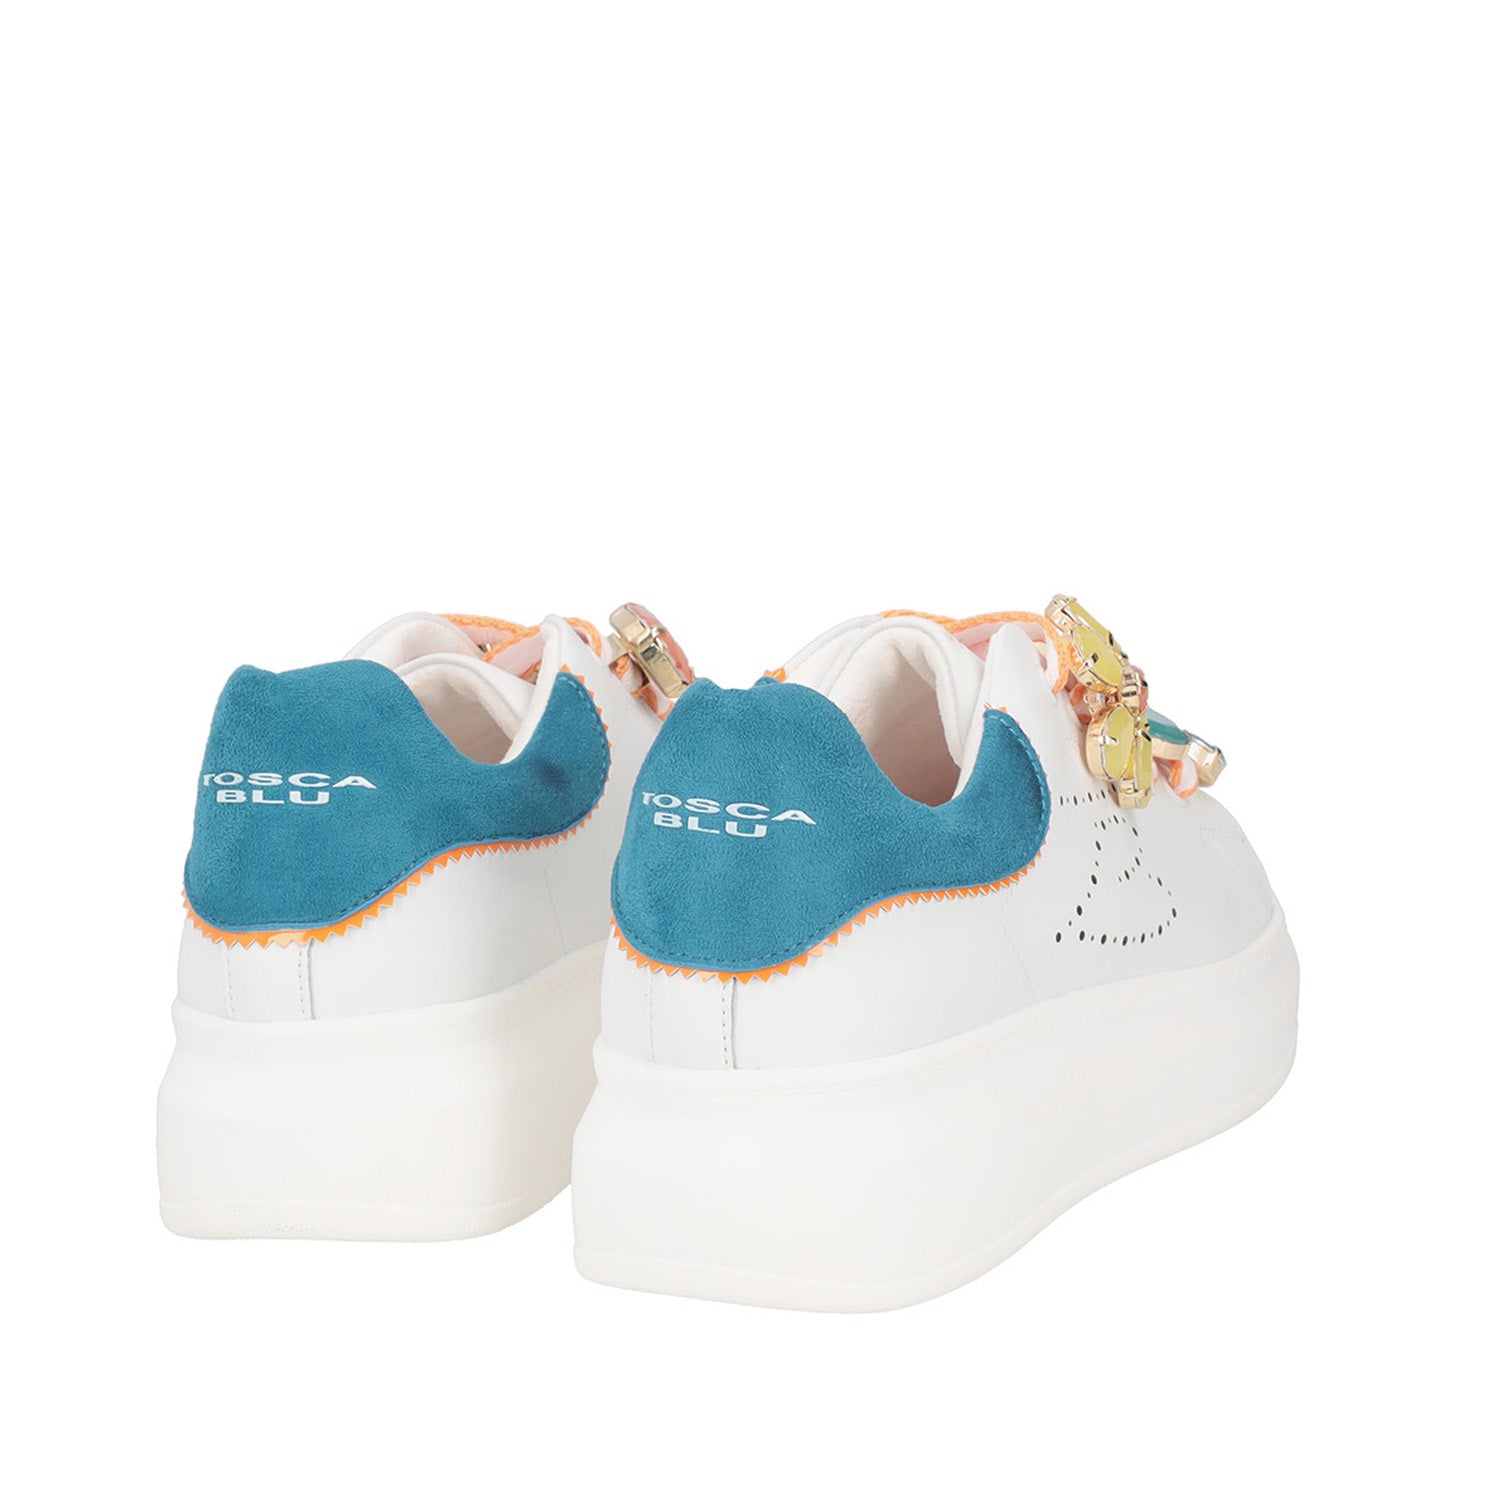 WHITE/TURQUOISE GLAMOUR SNEAKER IN LEATHER WITH JEWEL FLOWERS | Tosca Blu